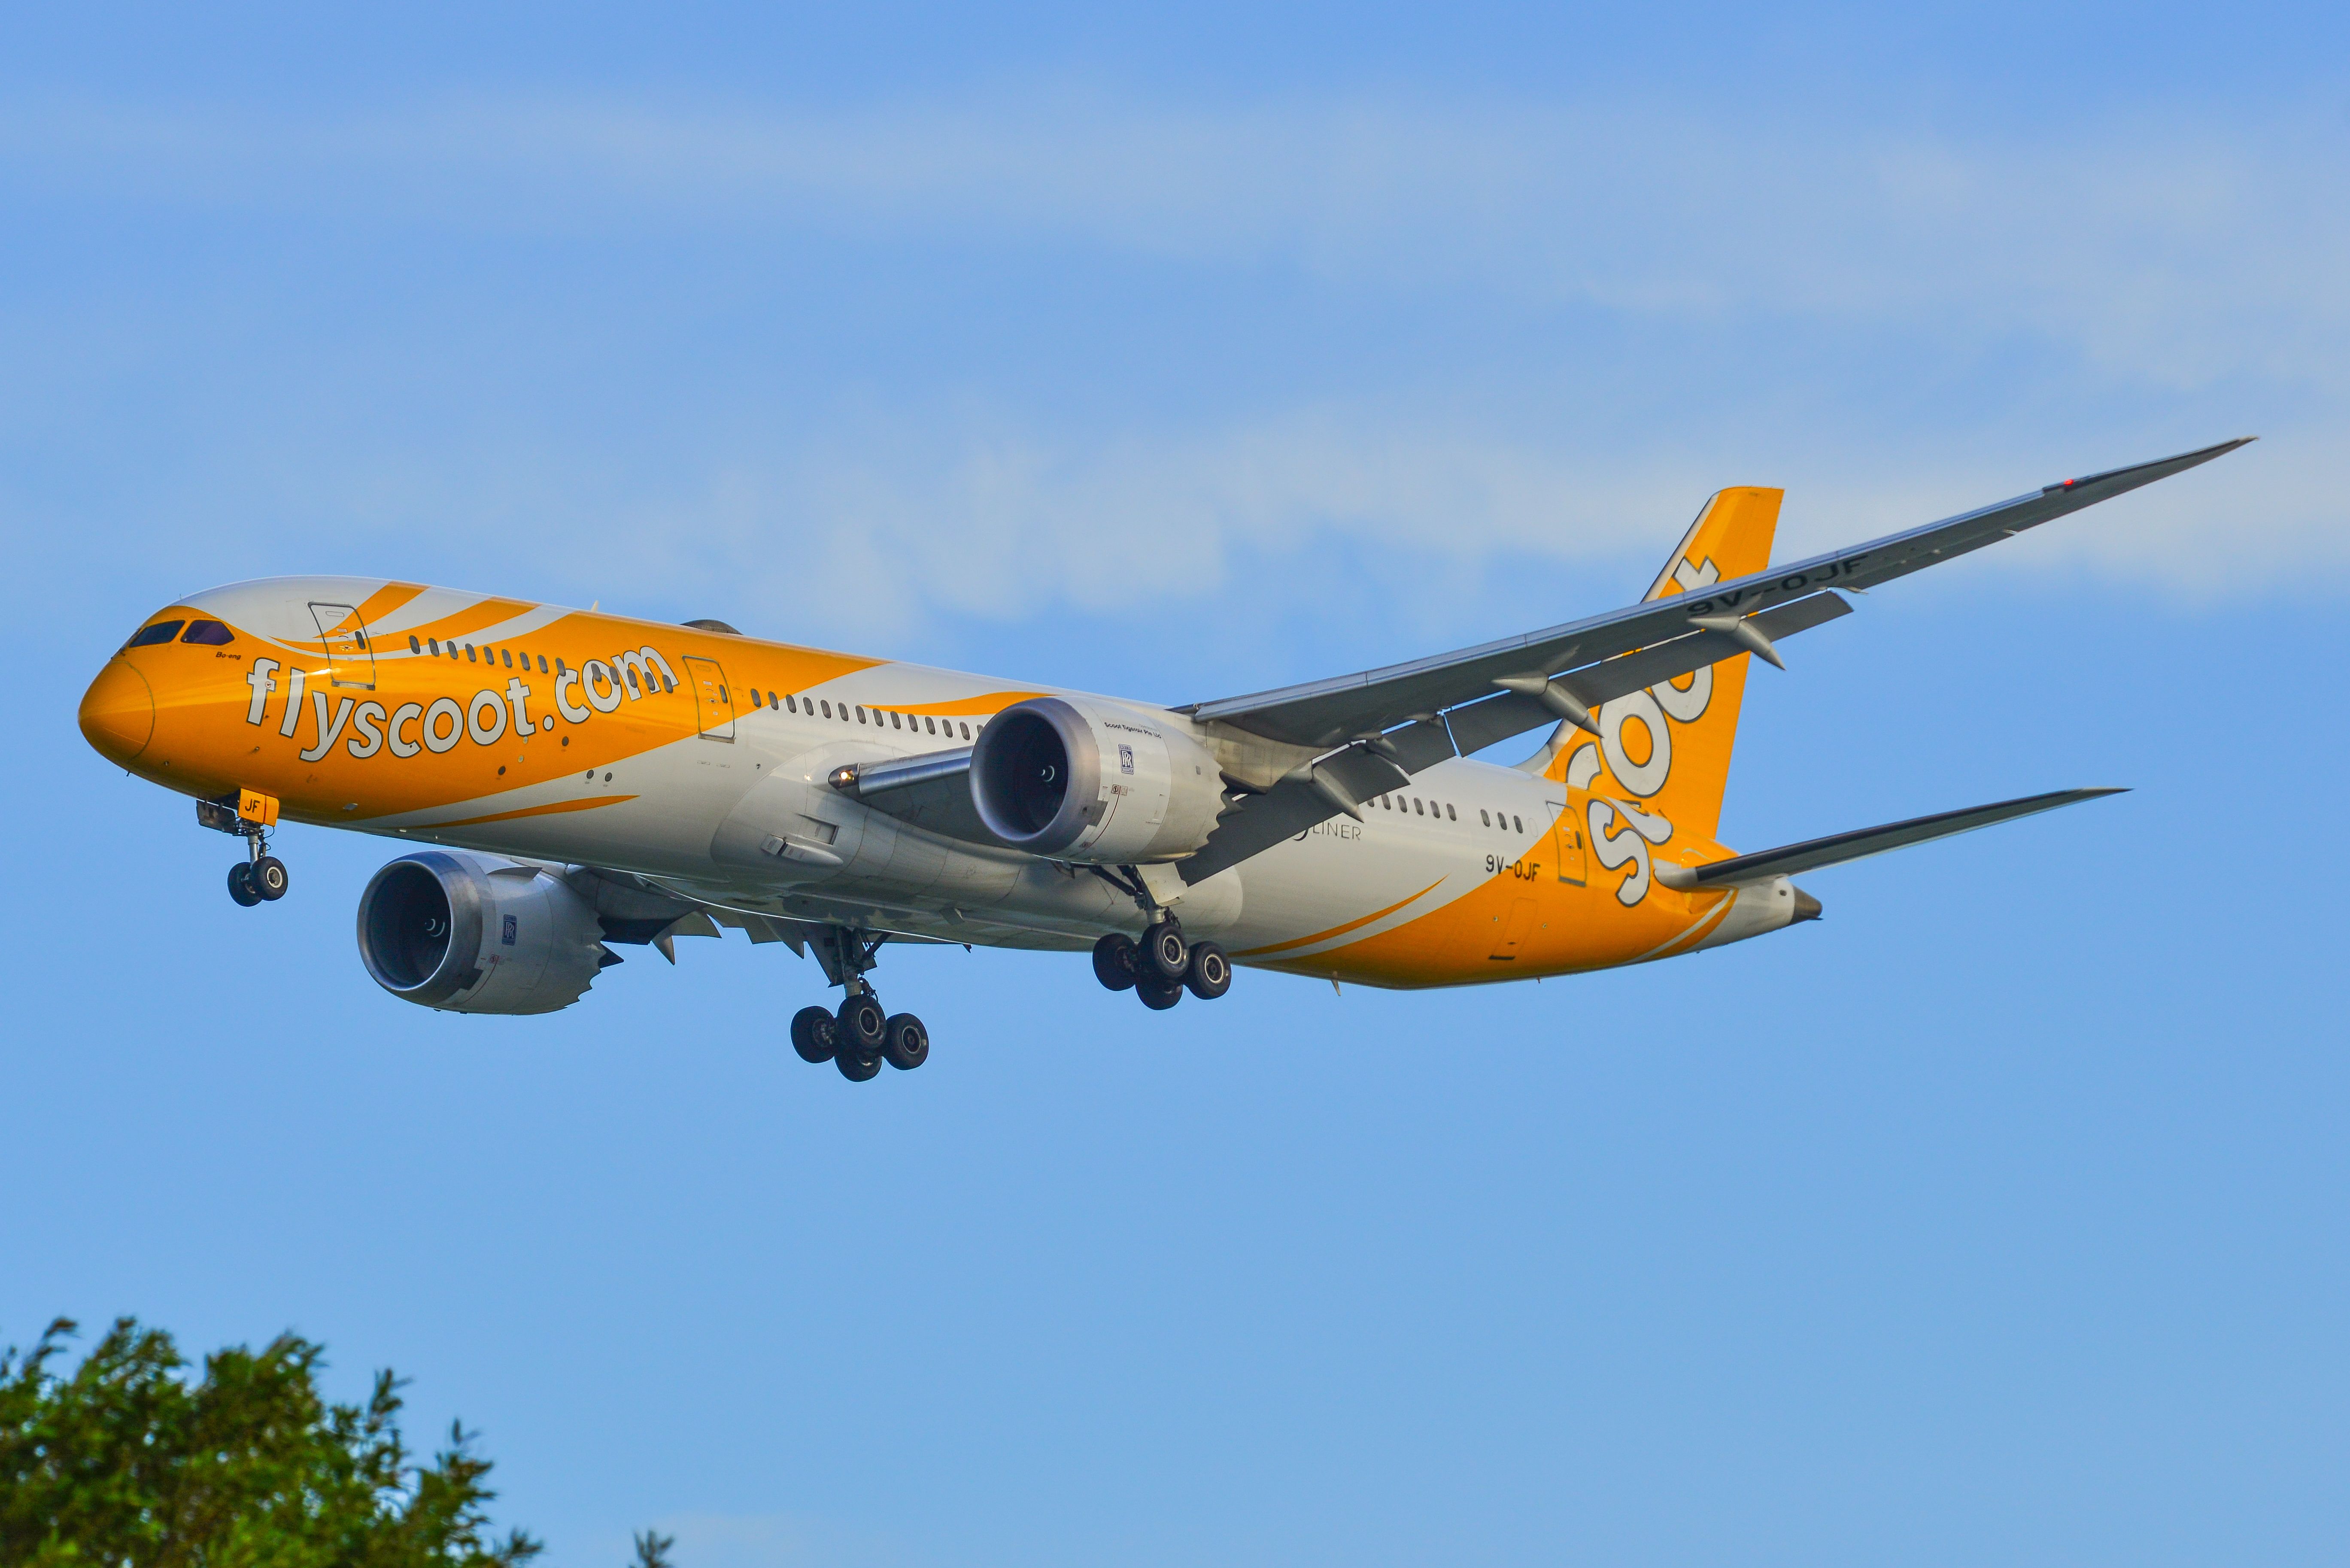 A Scoot Boeing 787-9 Dreamliner flying in the sky.